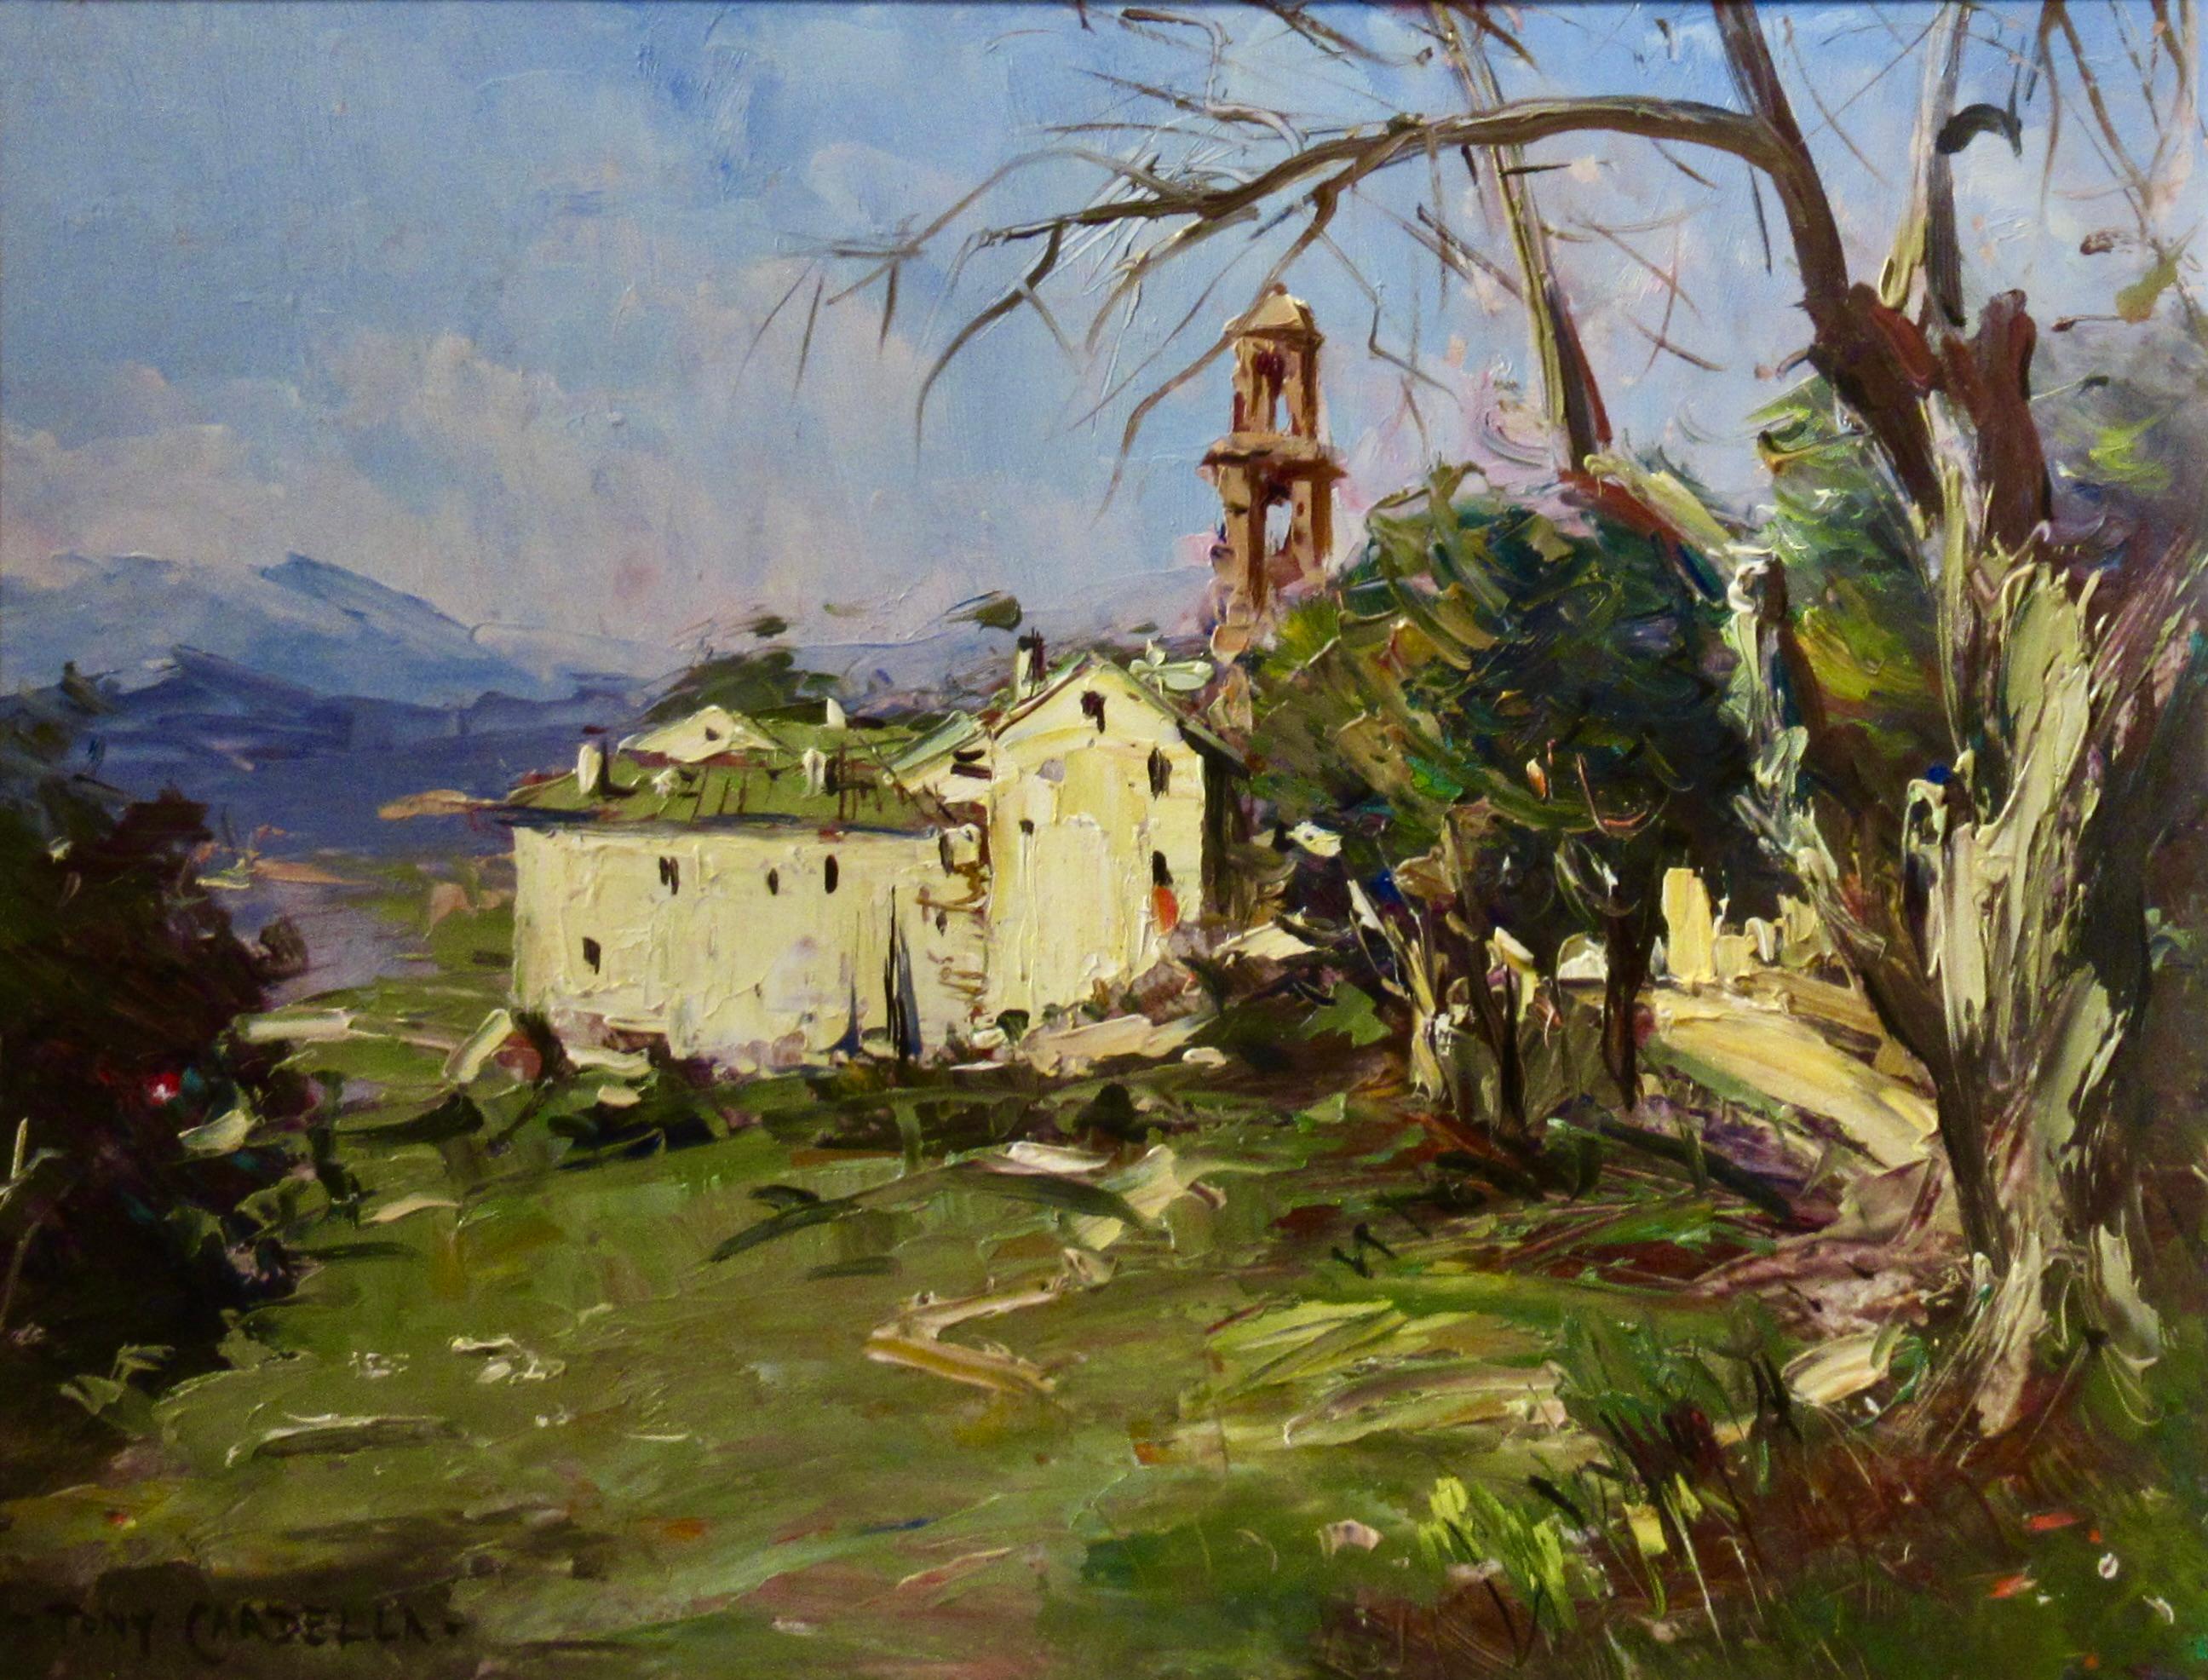 Corse (Corsica) - Painting by Tony Cardella